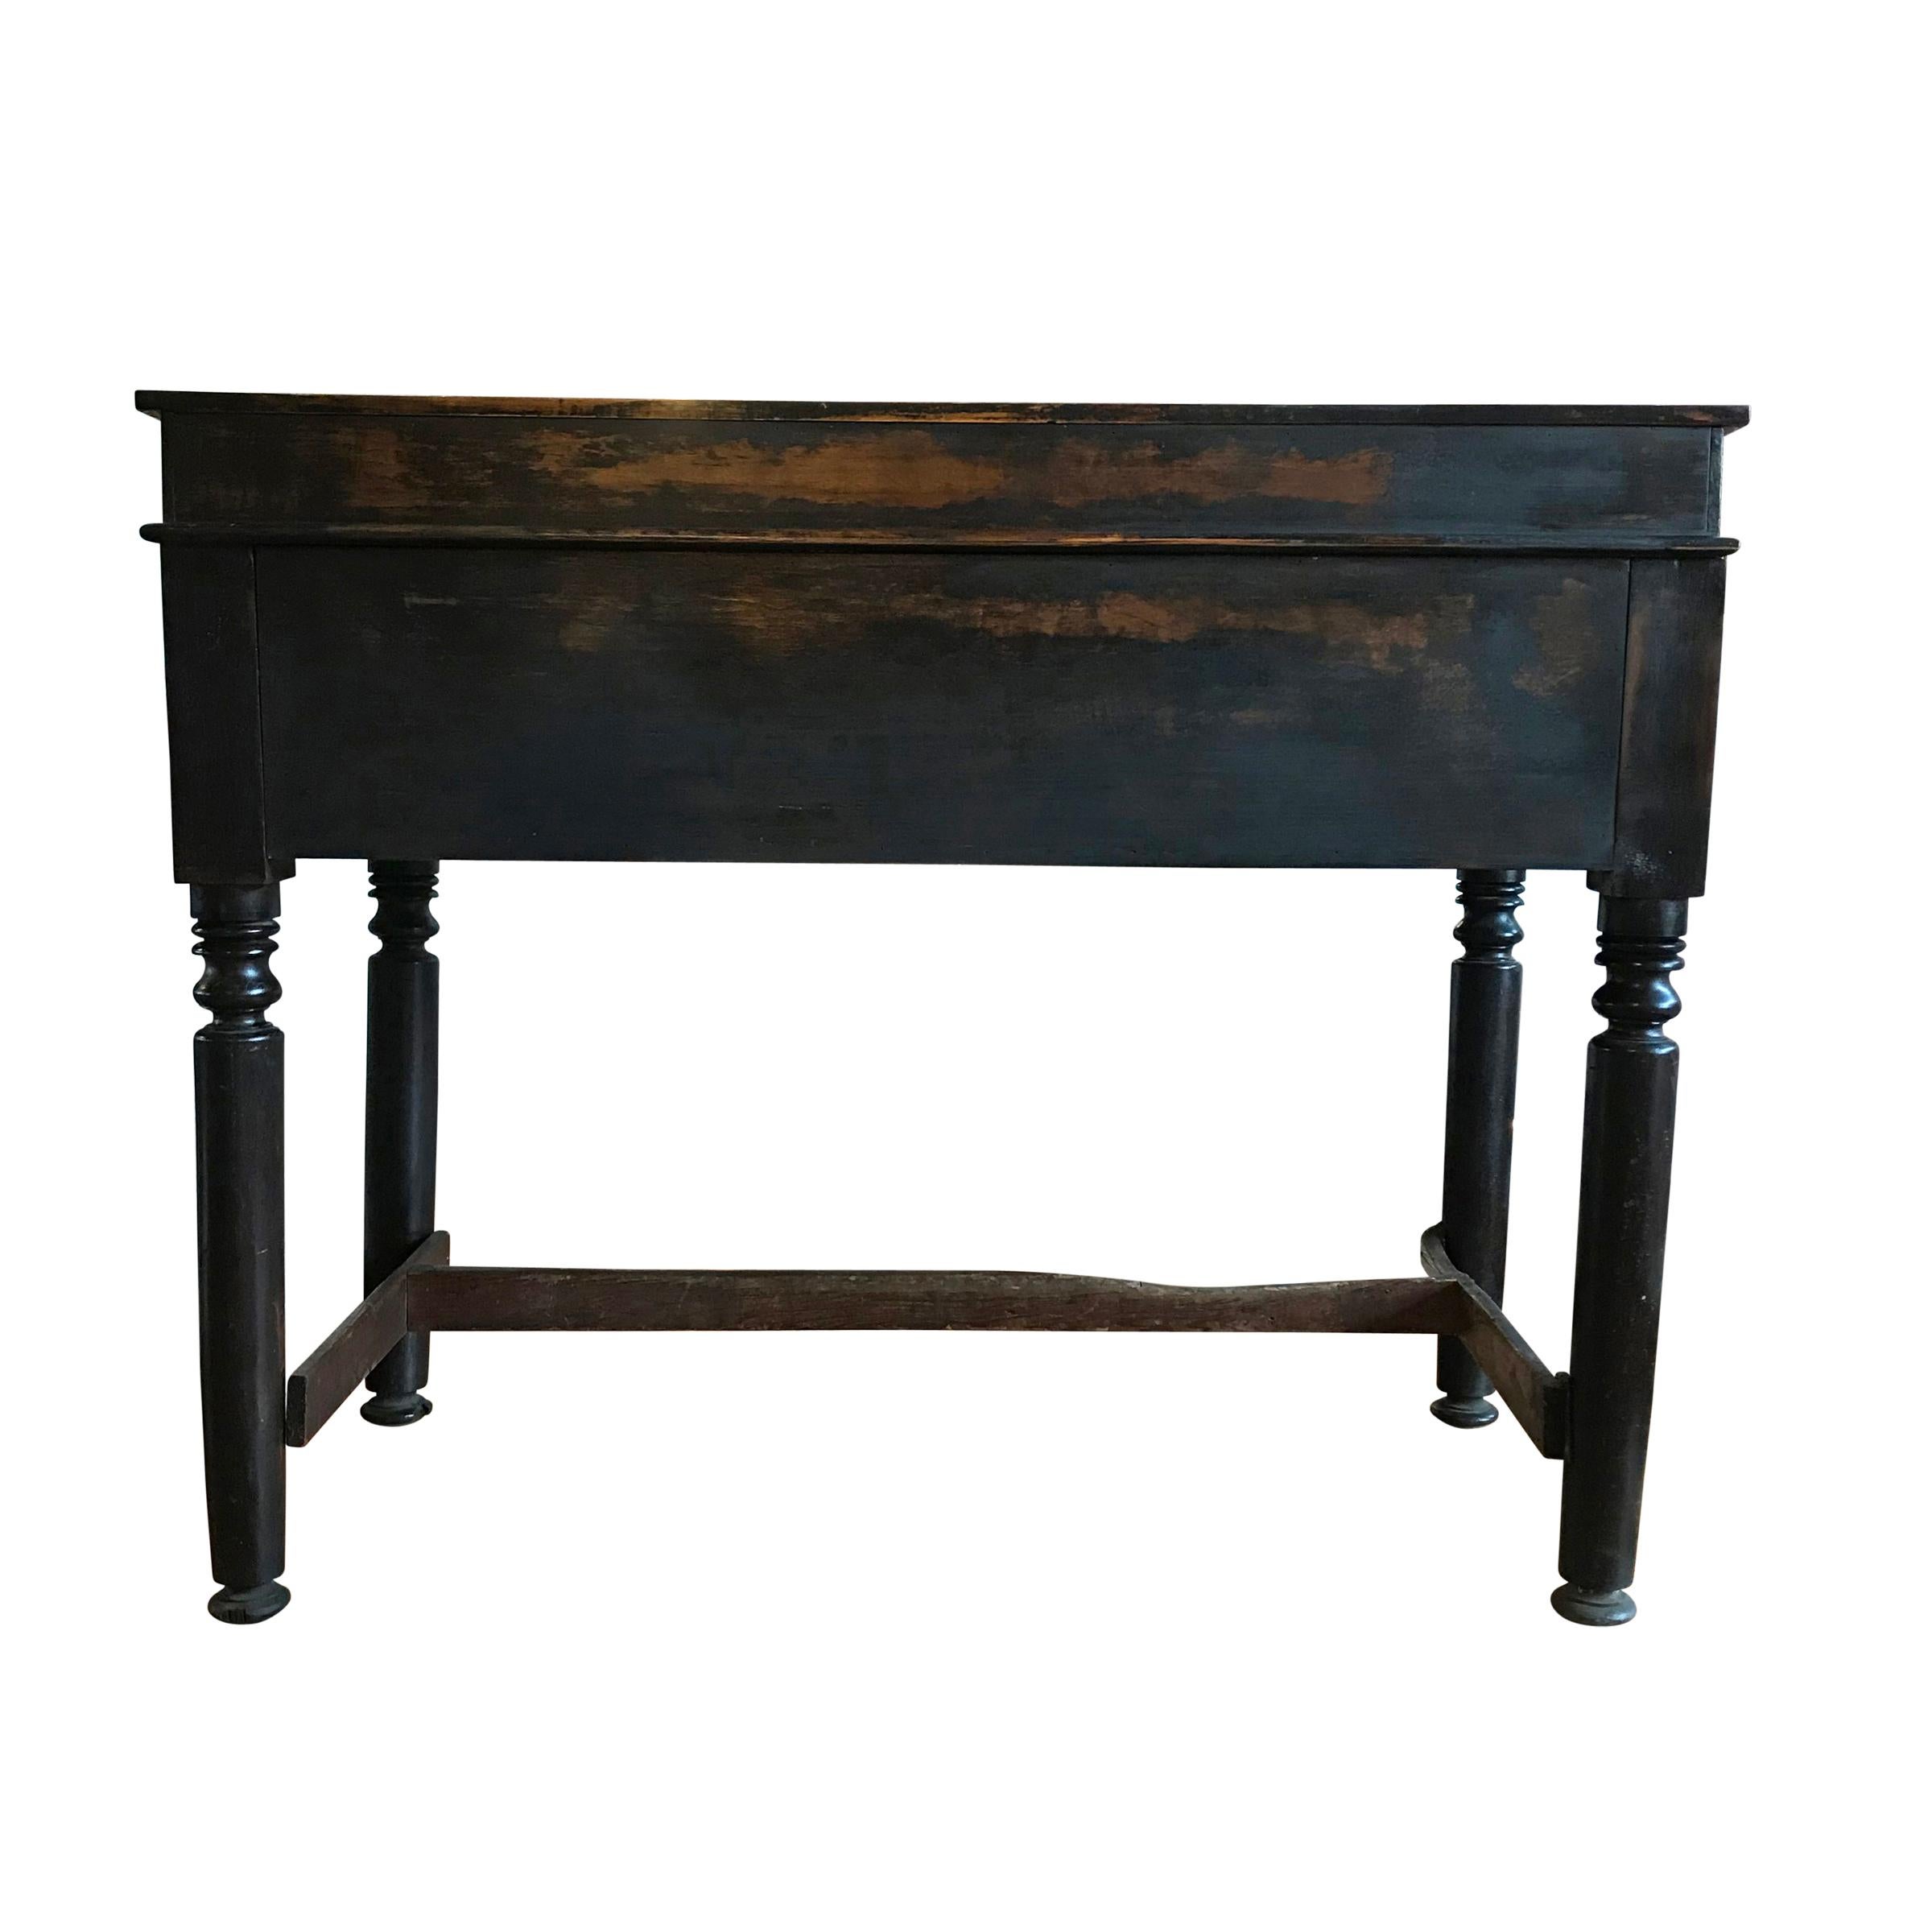 Rustic Early 20th Century American Foreman's Desk